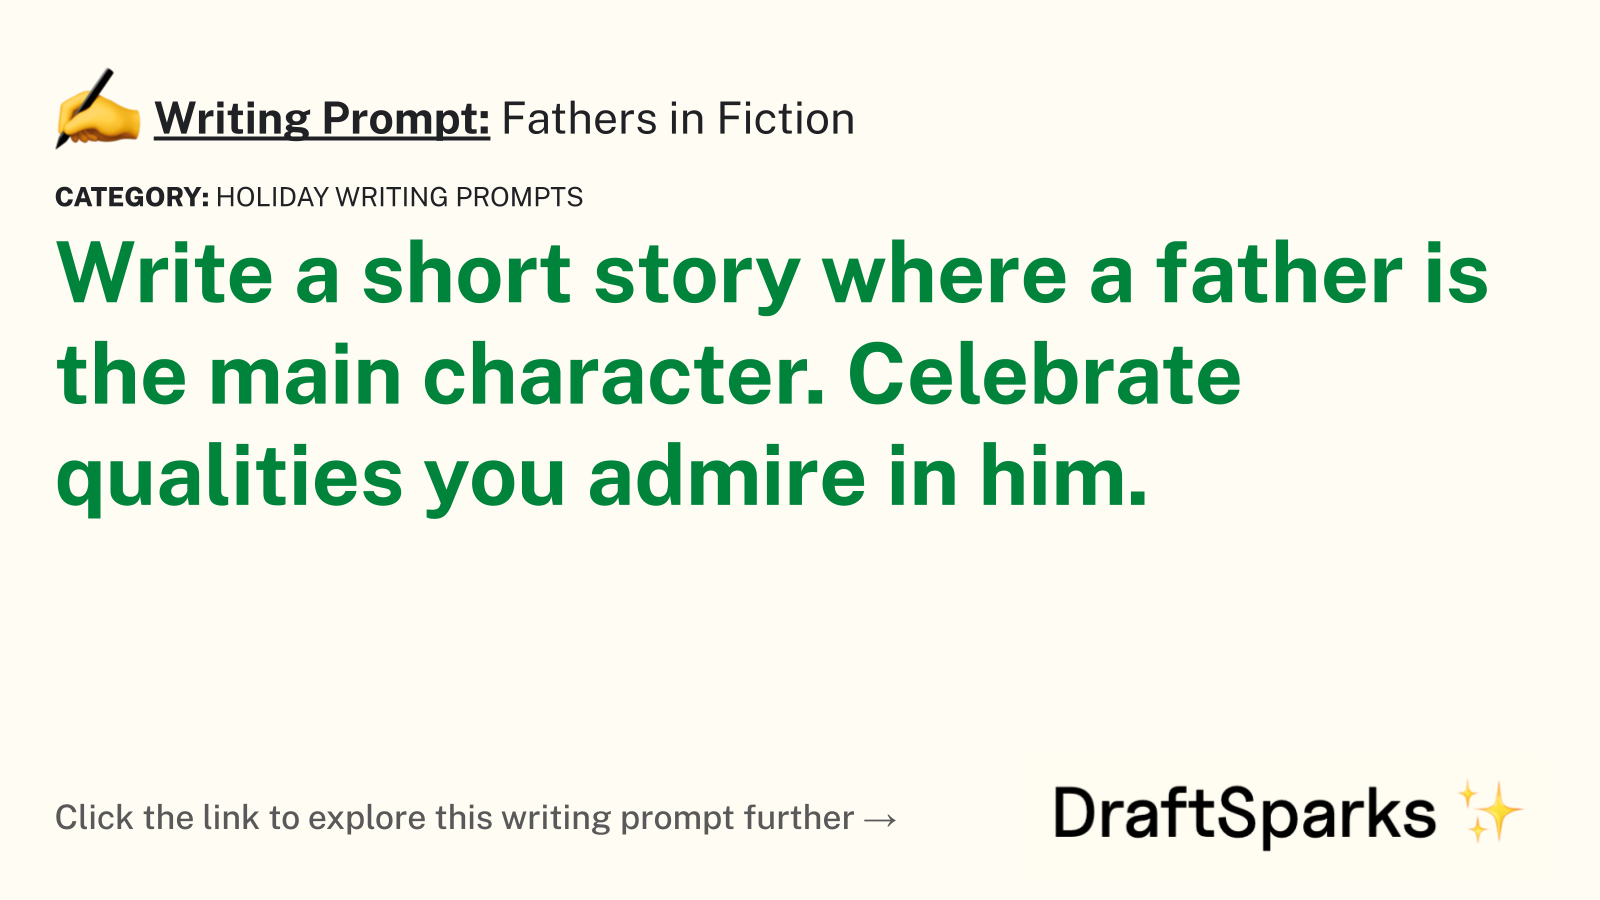 Fathers in Fiction